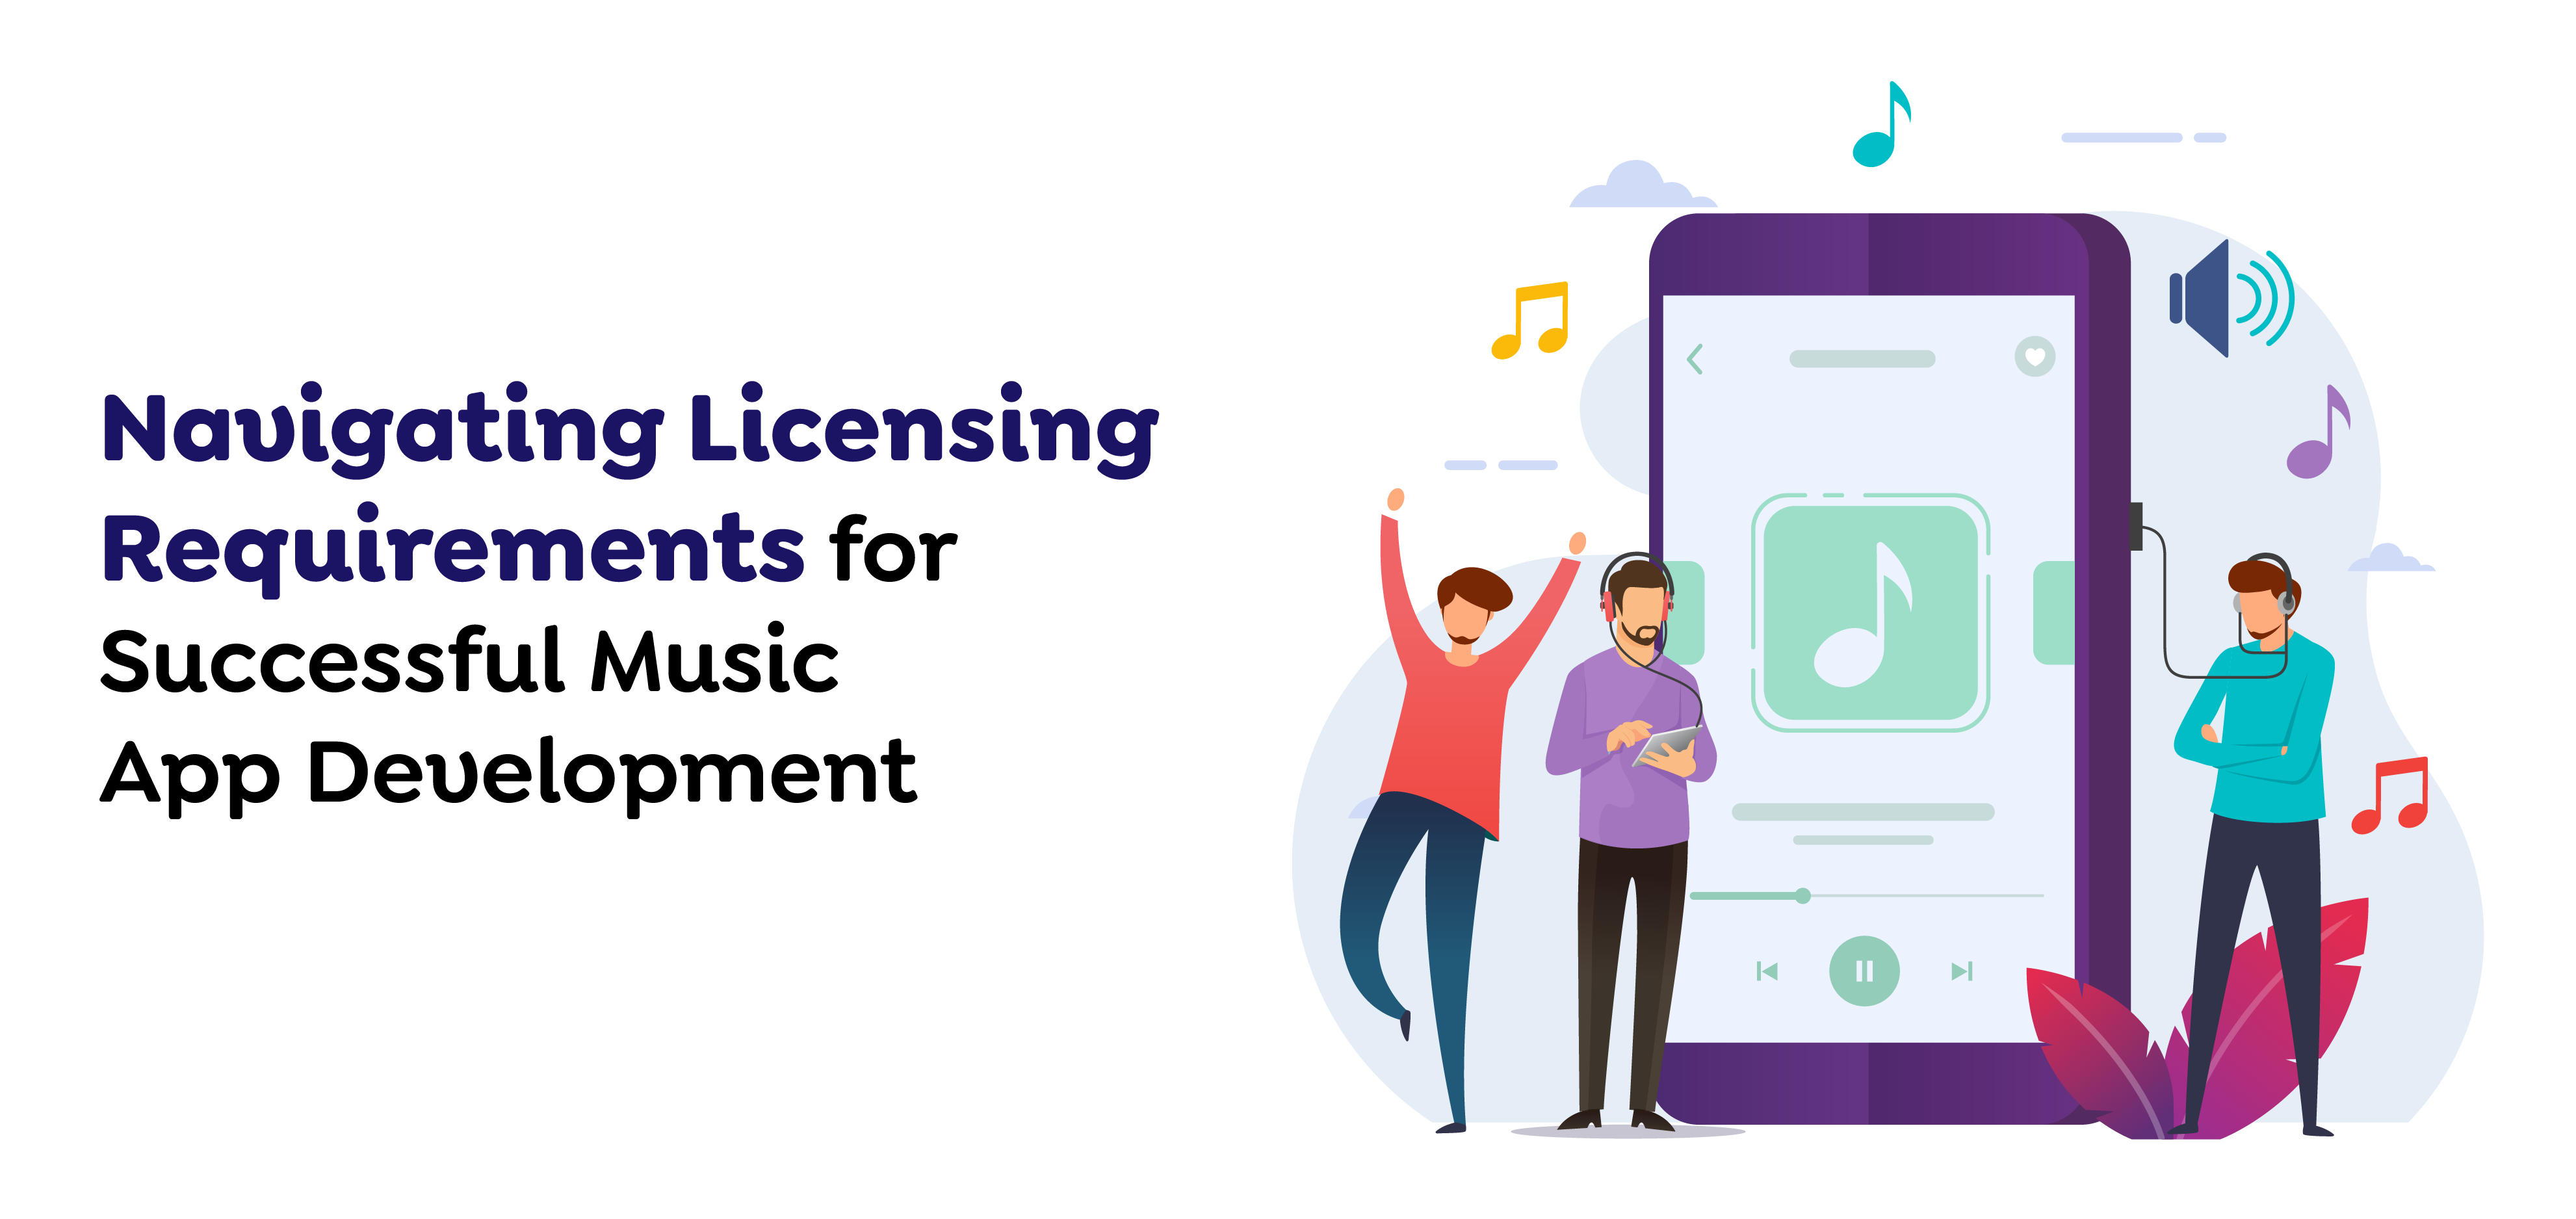 Navigating Licensing Requirements for Successful Music App Development